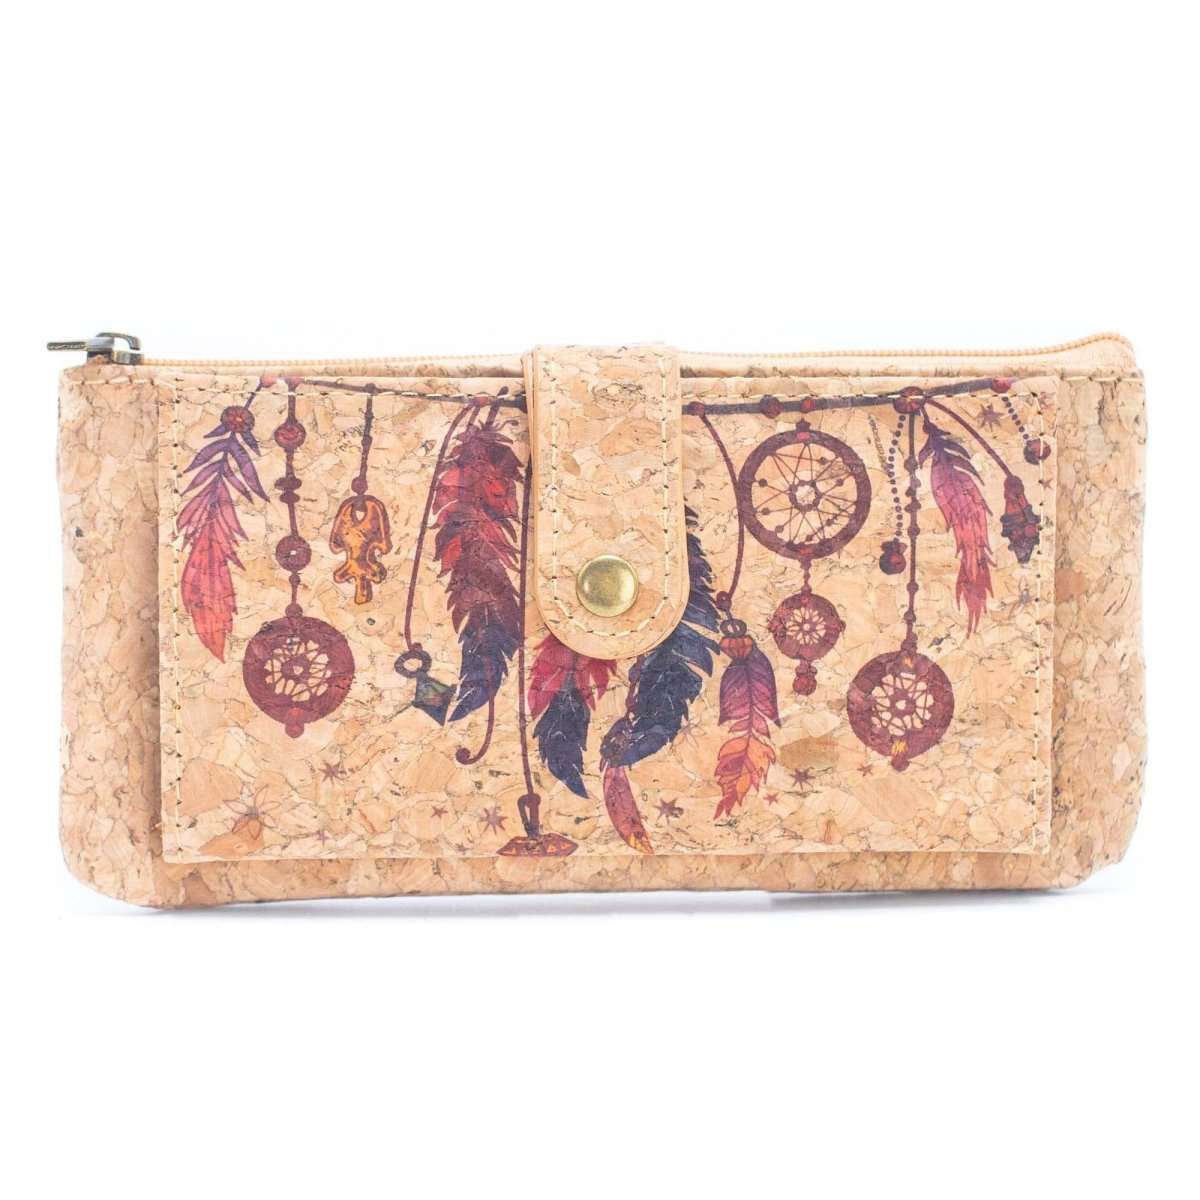 Ladies Slim Cork Card Wallets with feathers and dream catchers on the front